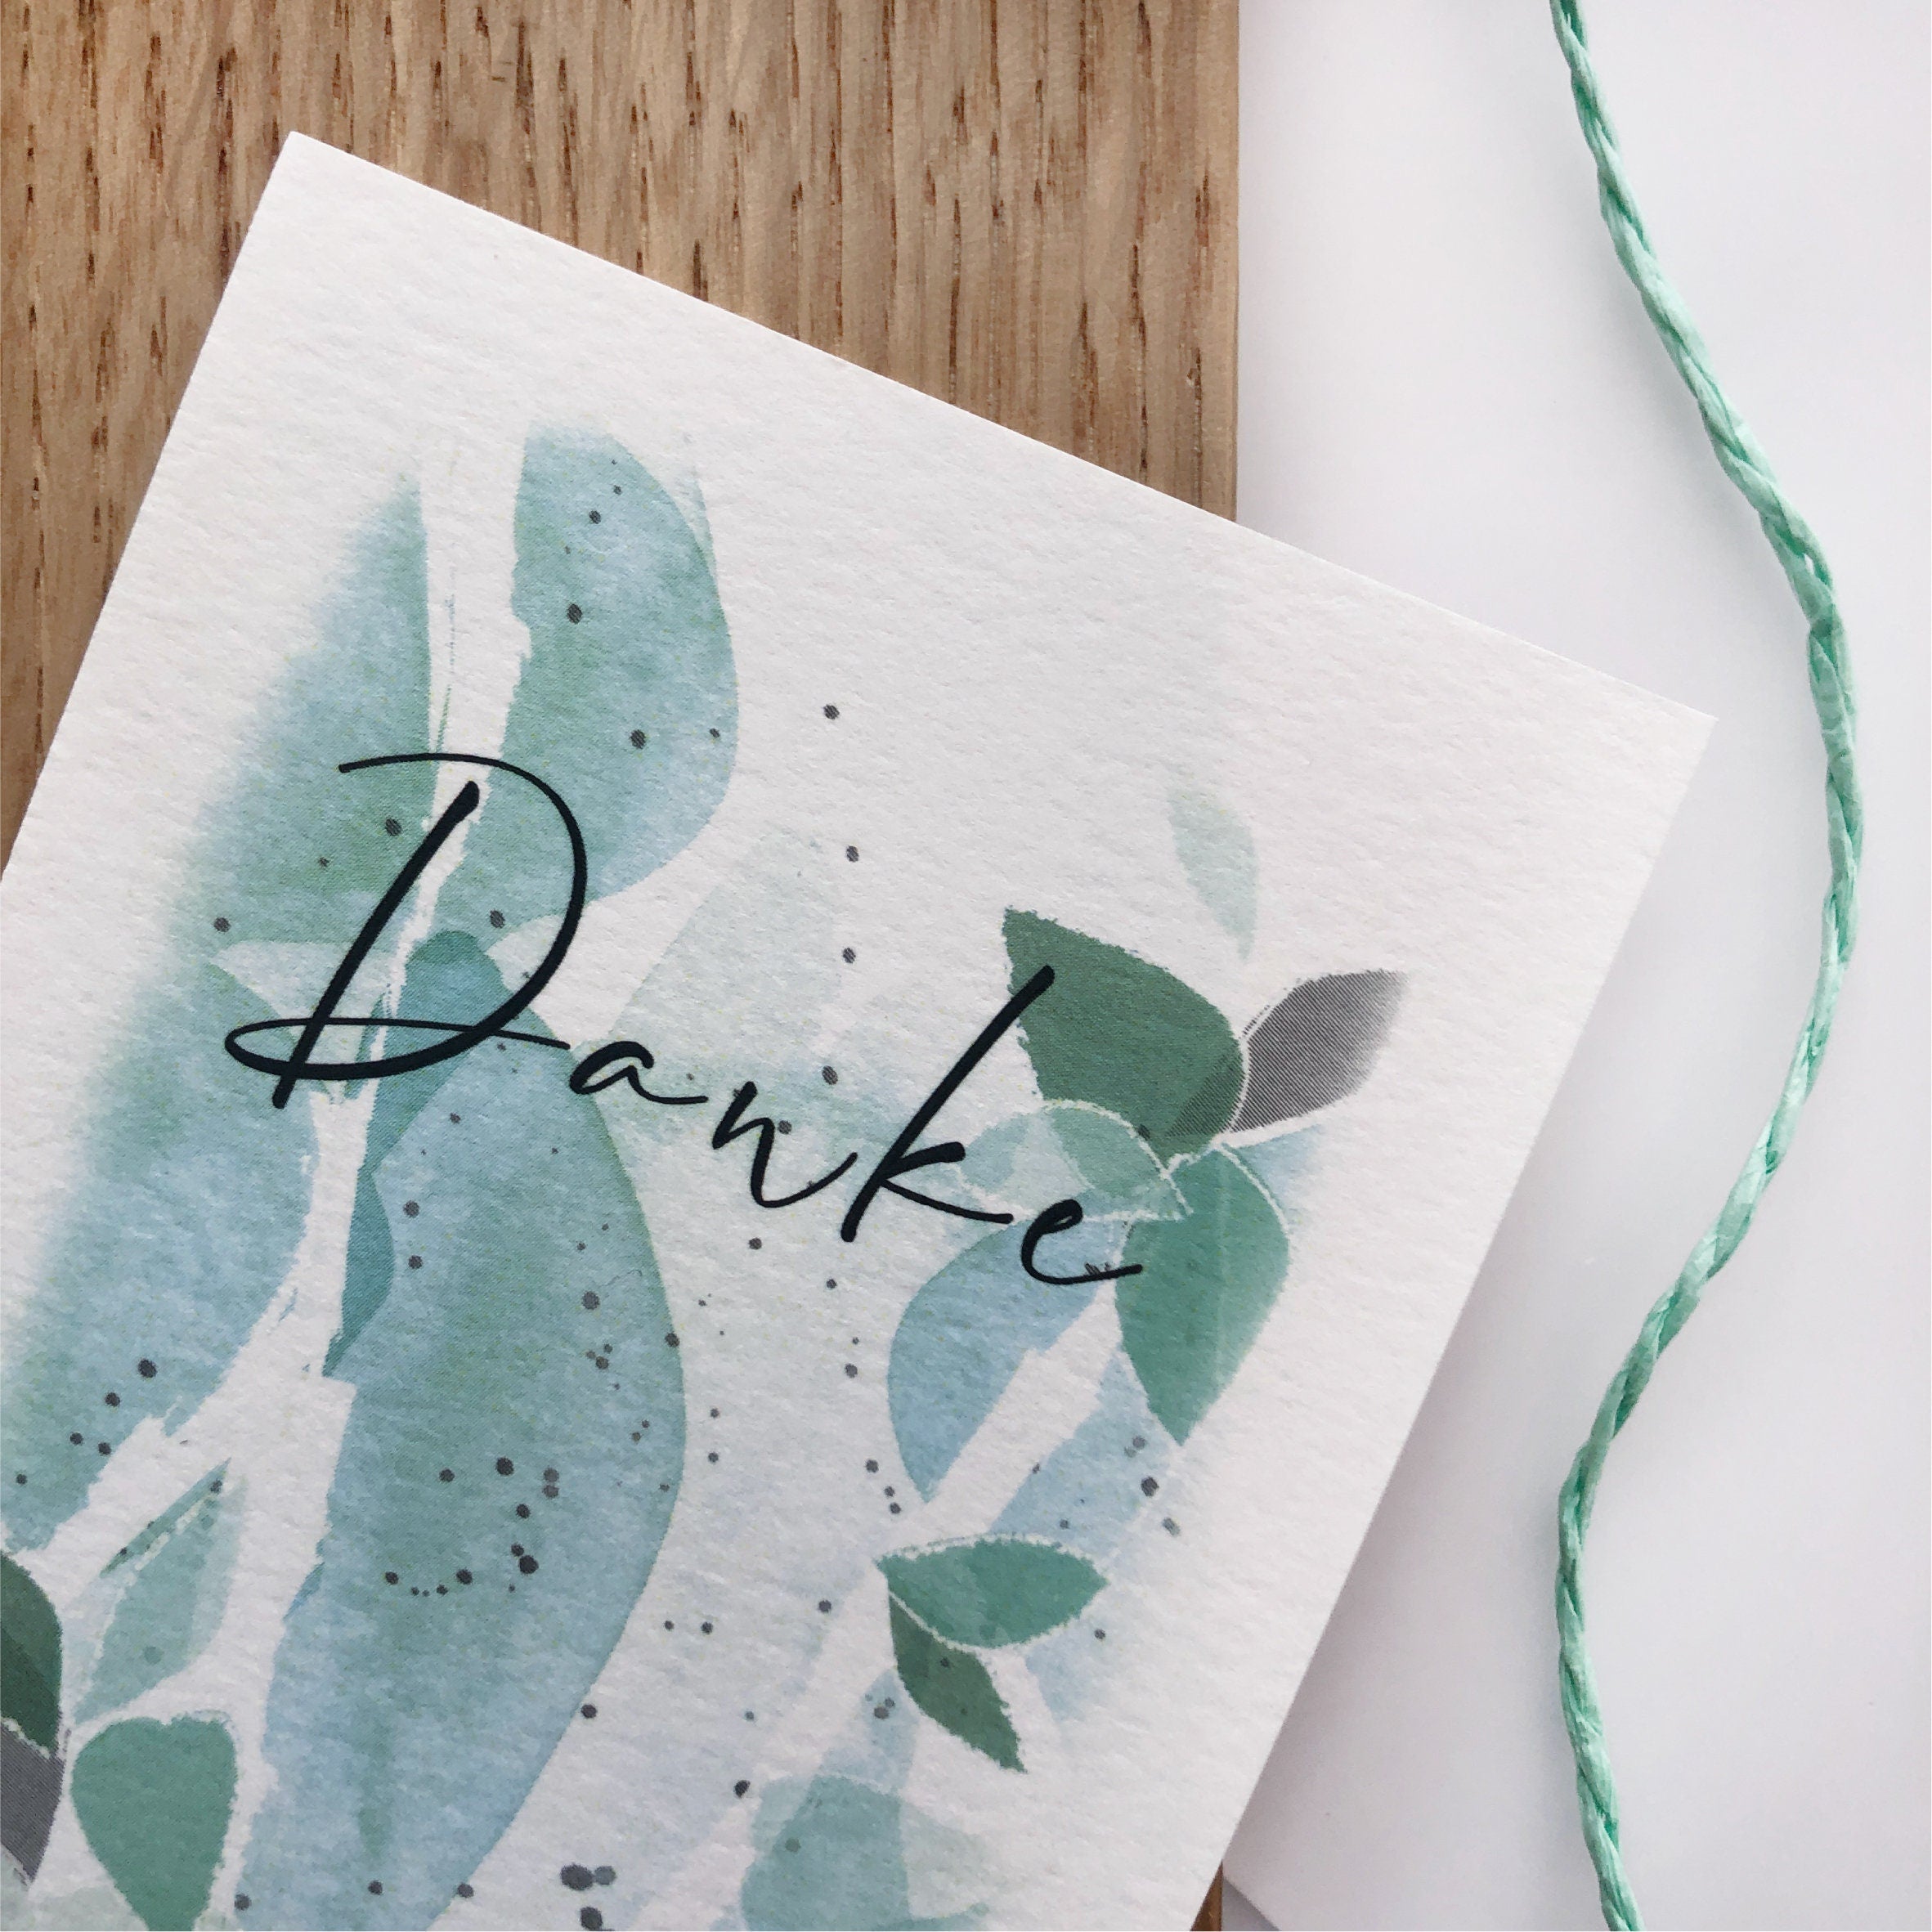 Mini Card - Thank You with Watercolor Leaves | gift wrapping | Cards to say thank you